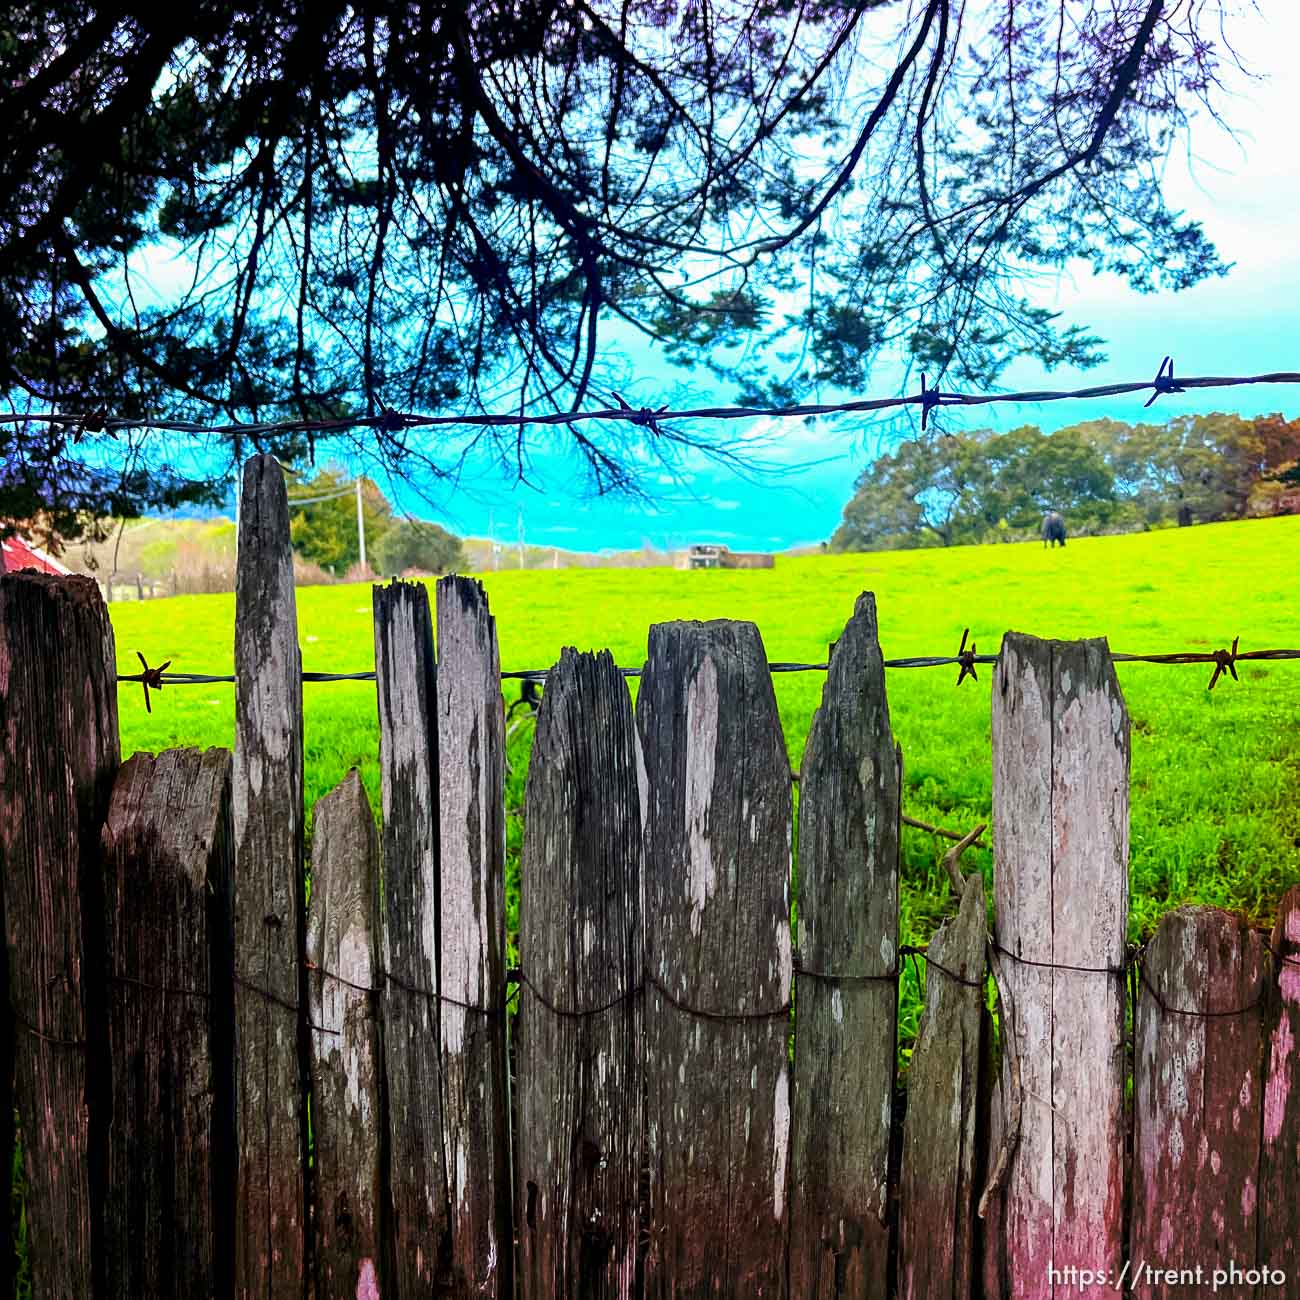 the fence